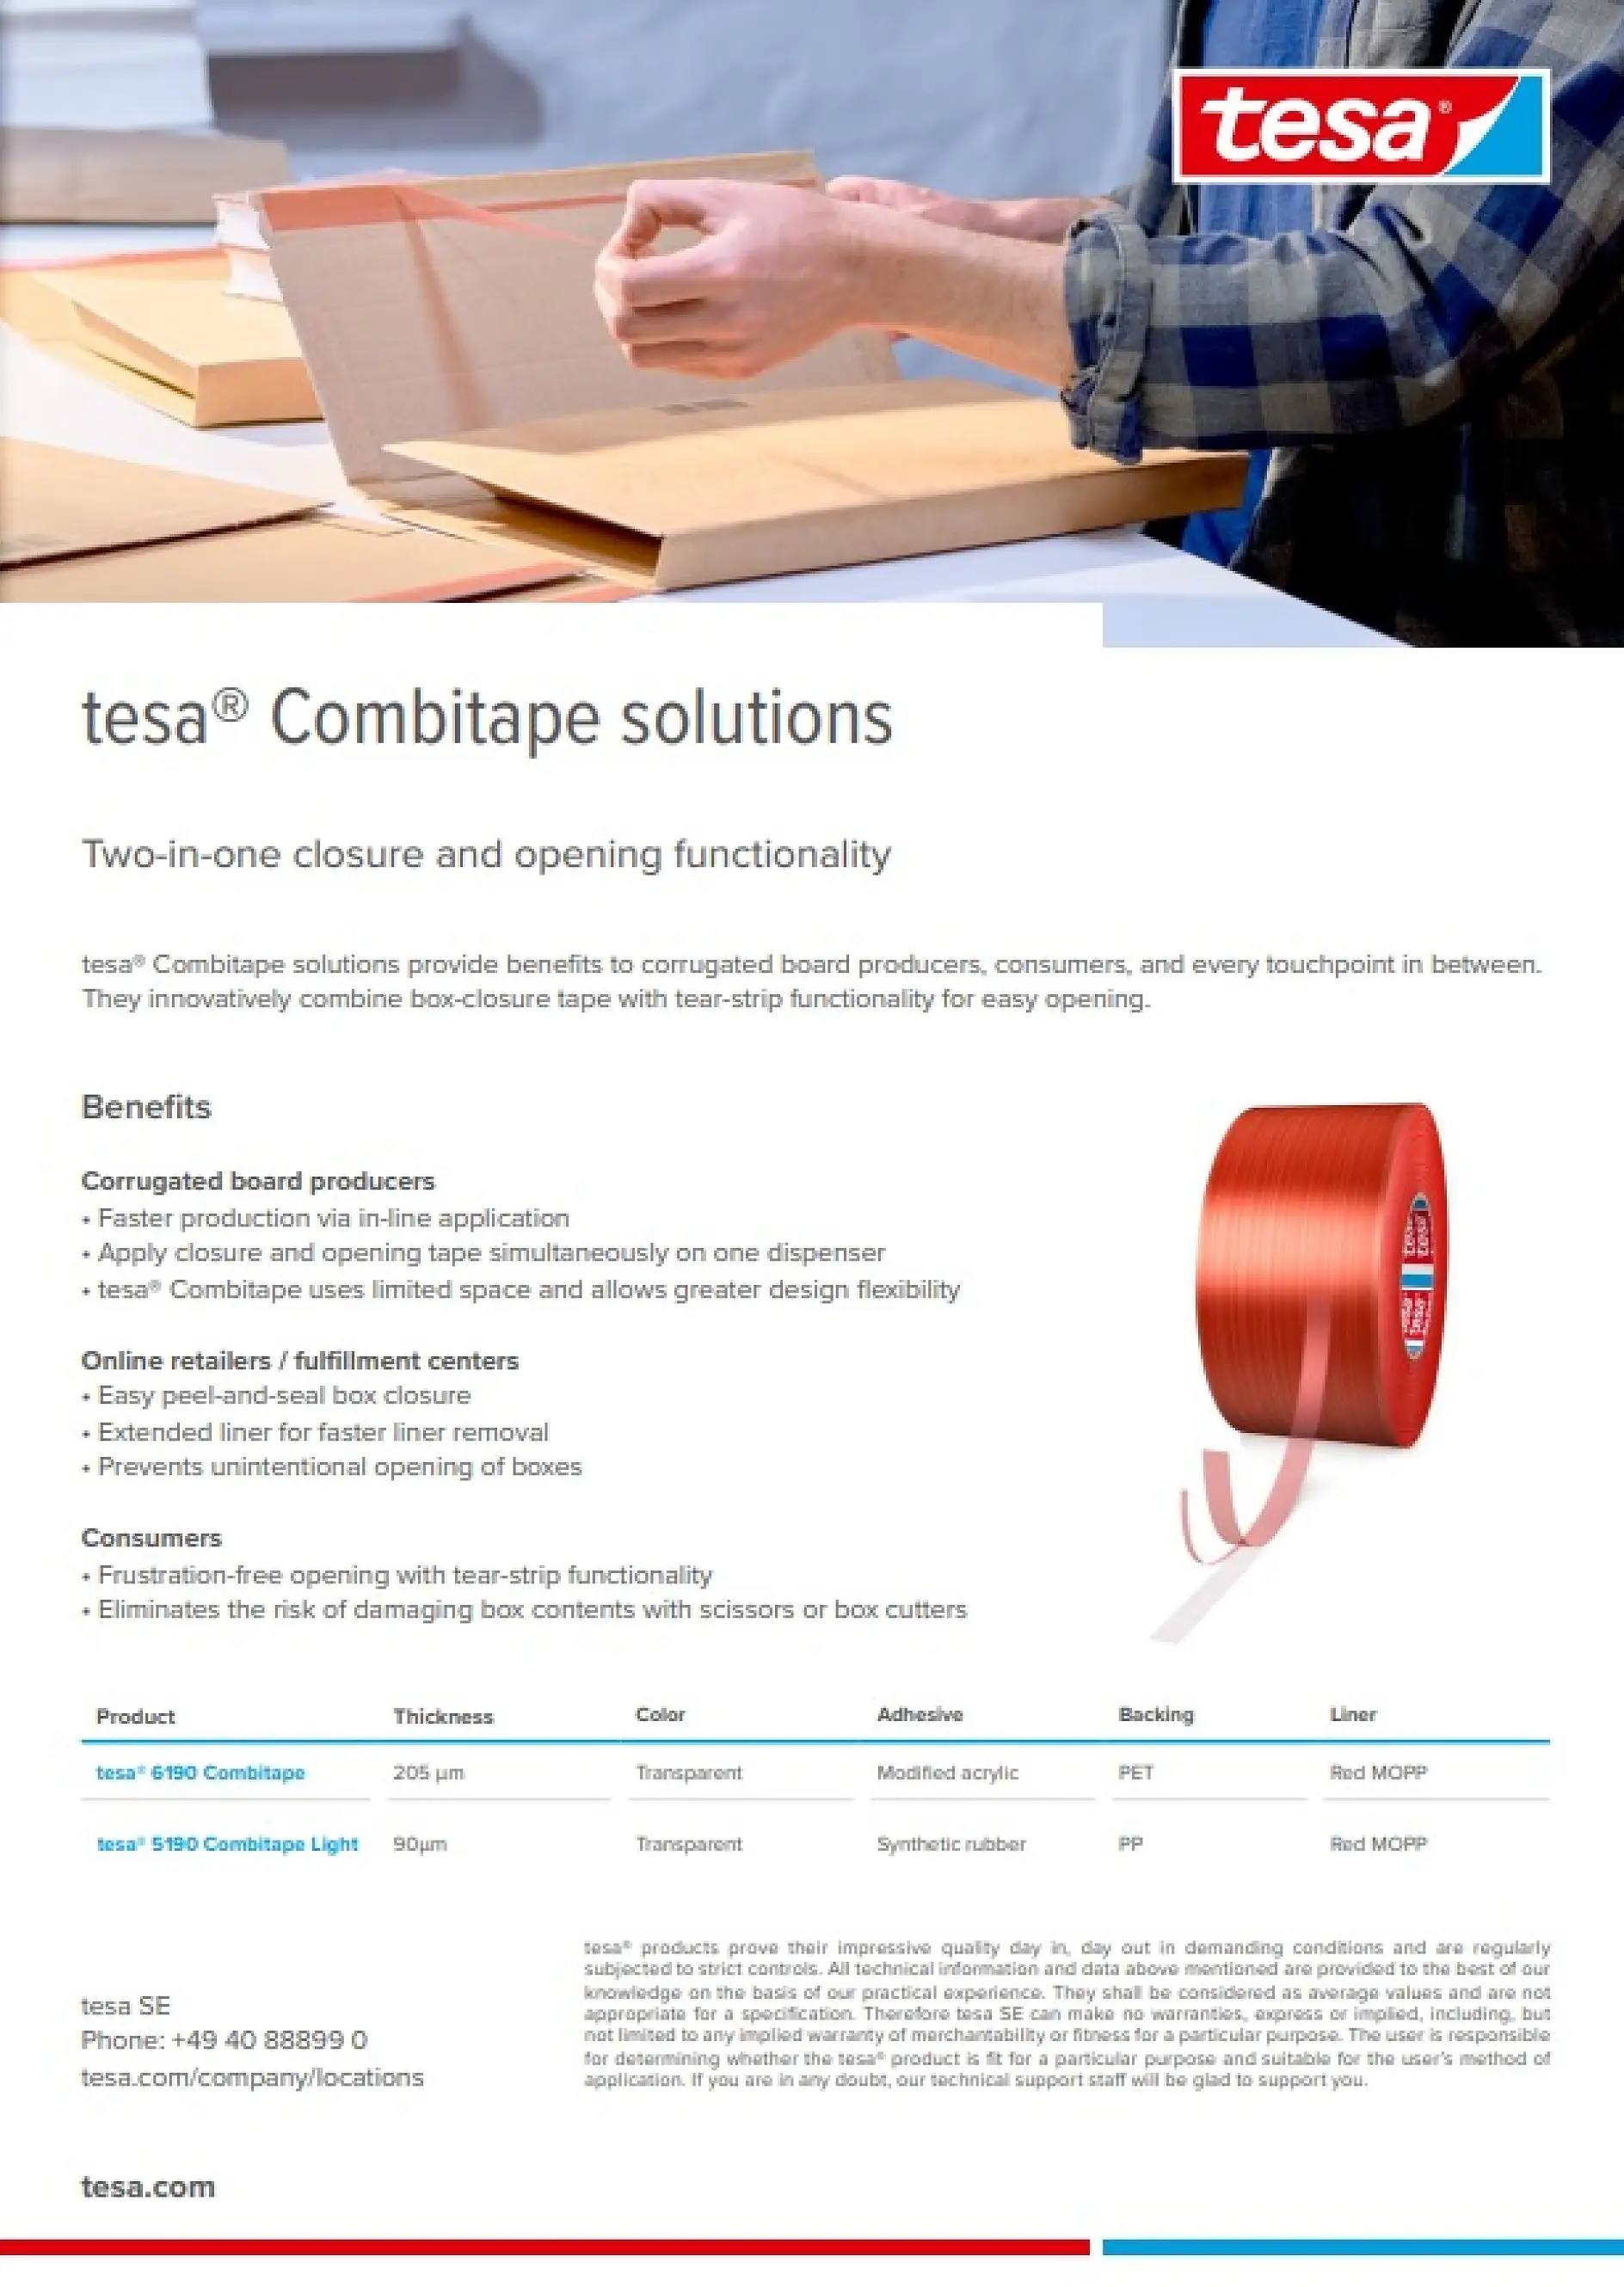 tesa® 6190 Combitape One-Pager